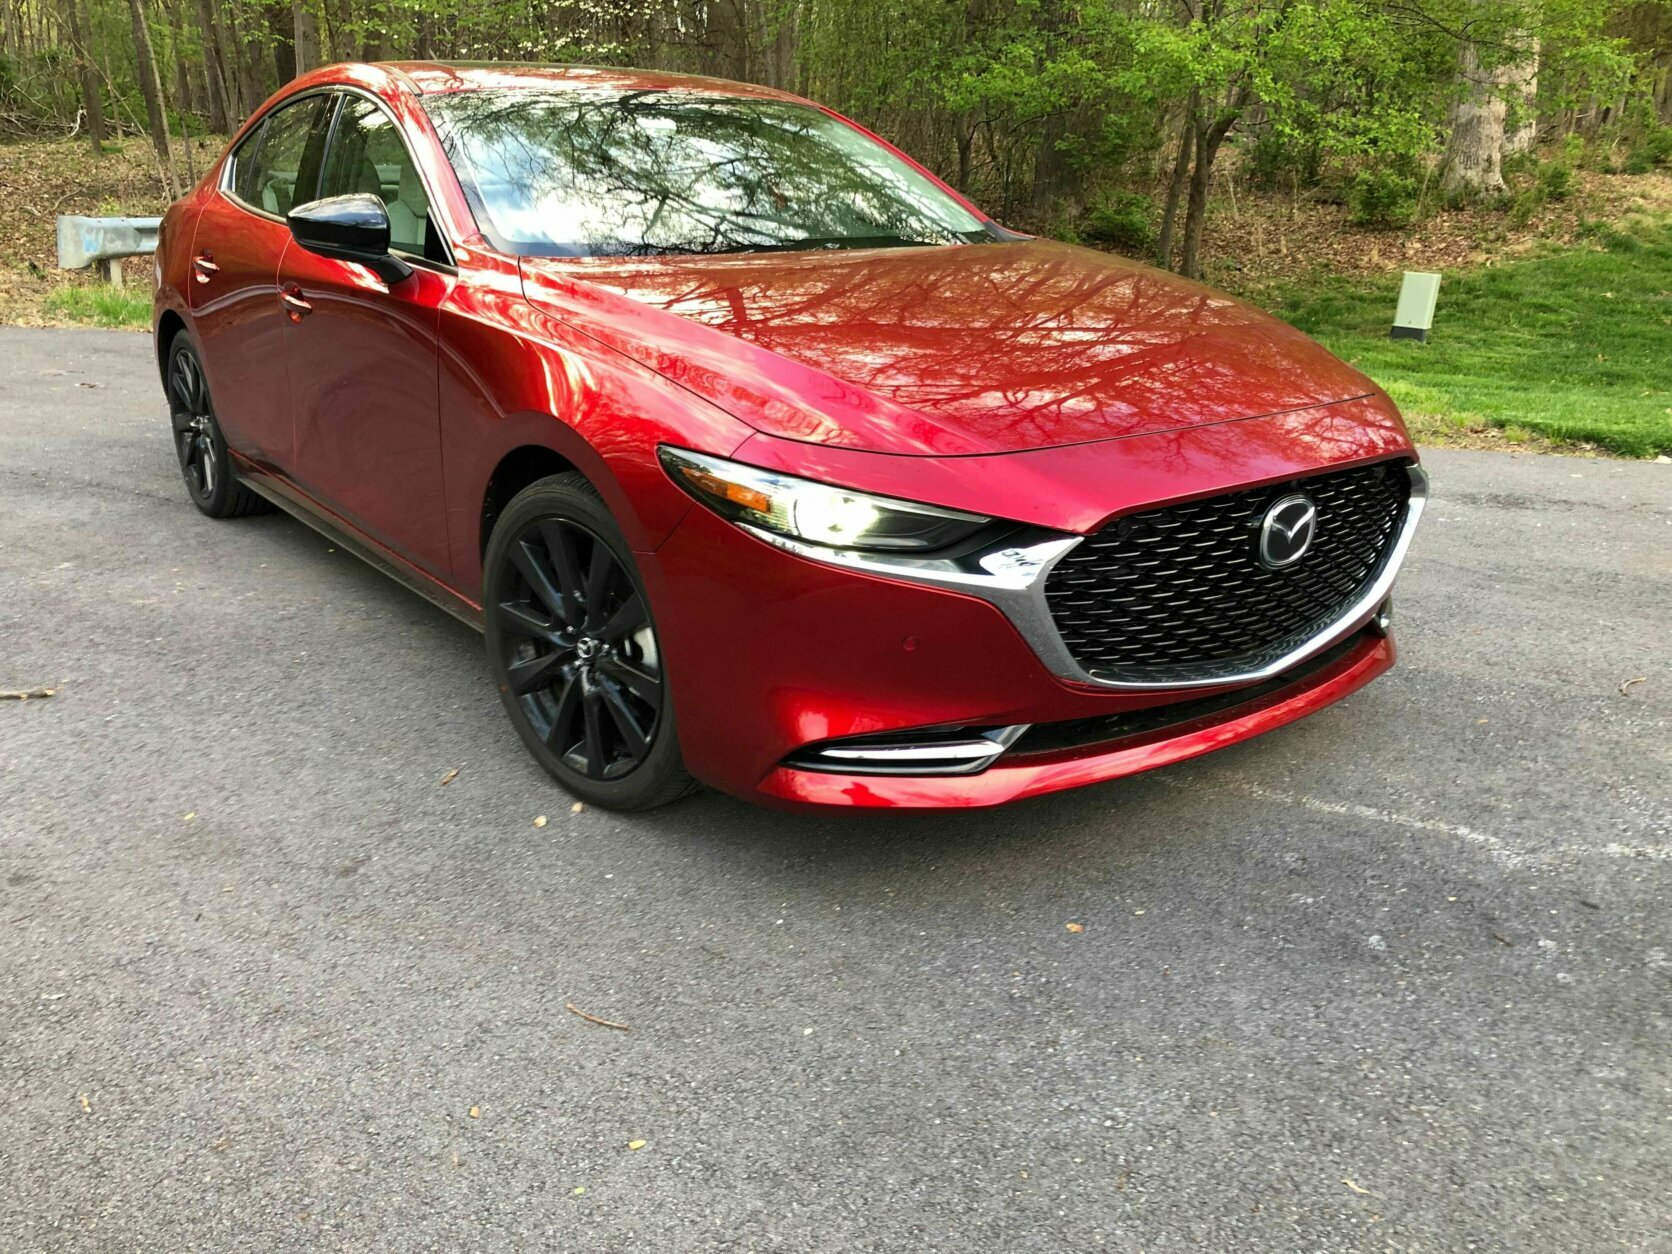 Car Review Looking for a refined compact sedan? The 2021 Mazda3 2.5